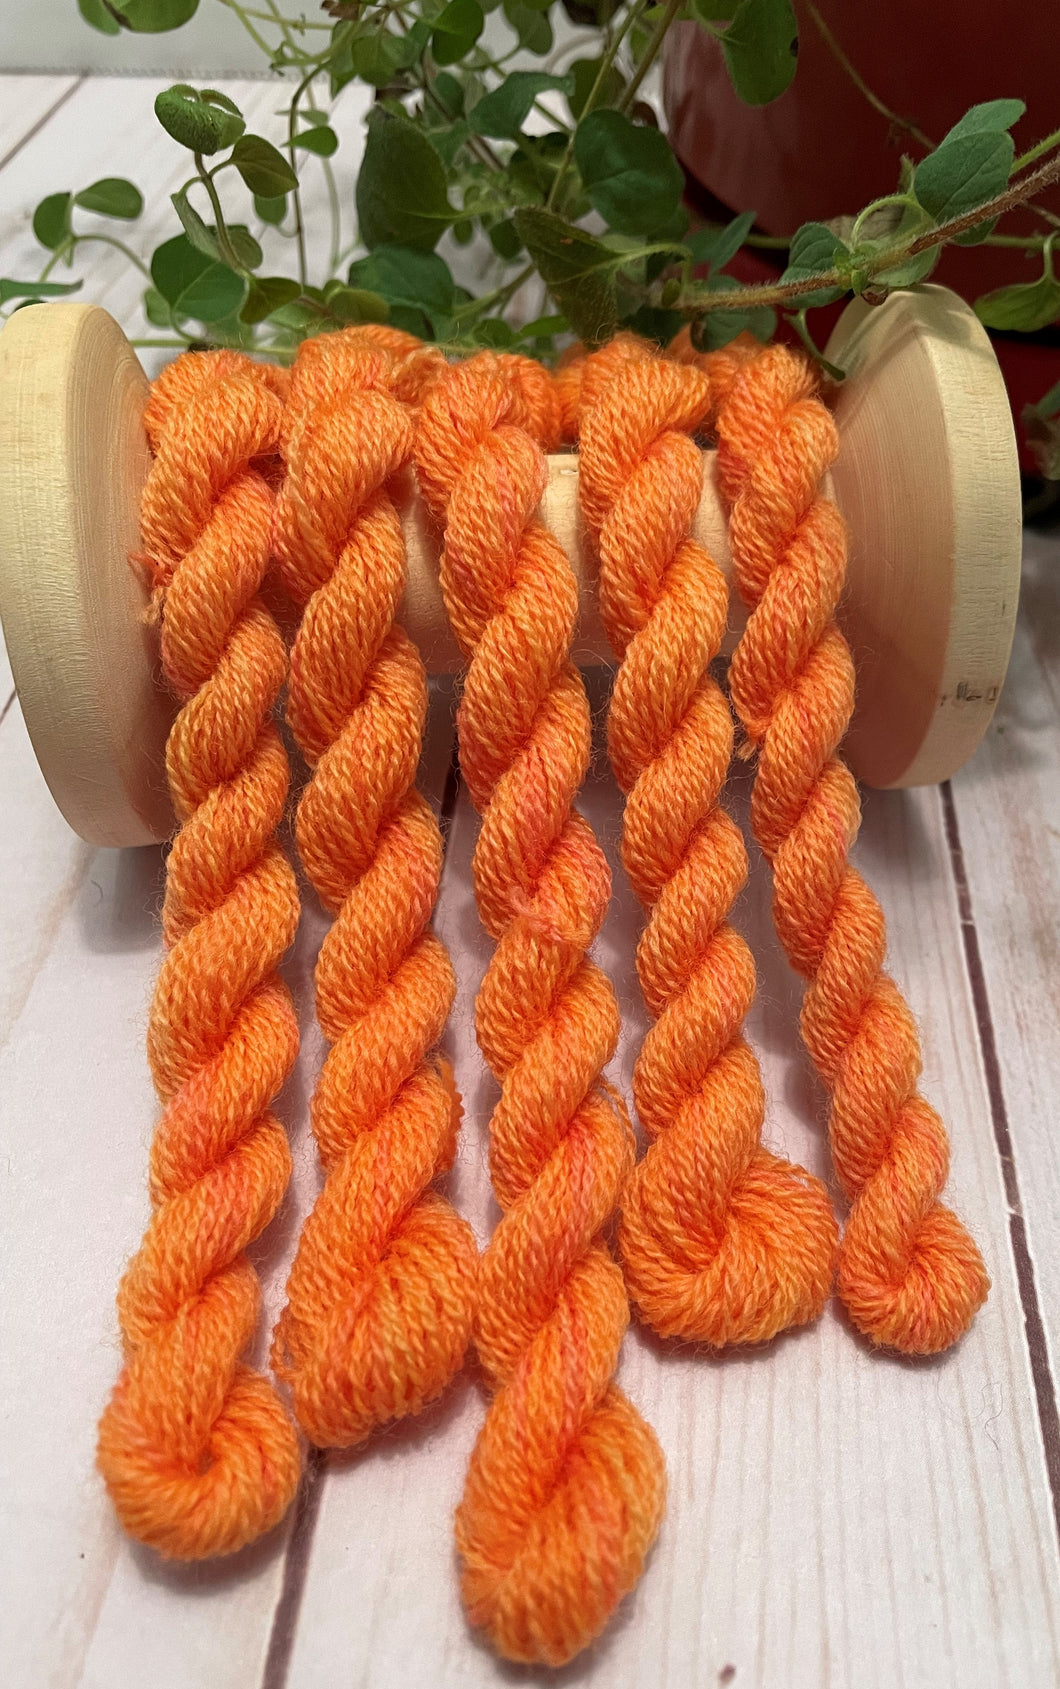 Skeins of hand dyed, medium orange wool thread with yellow and reddish highlights.